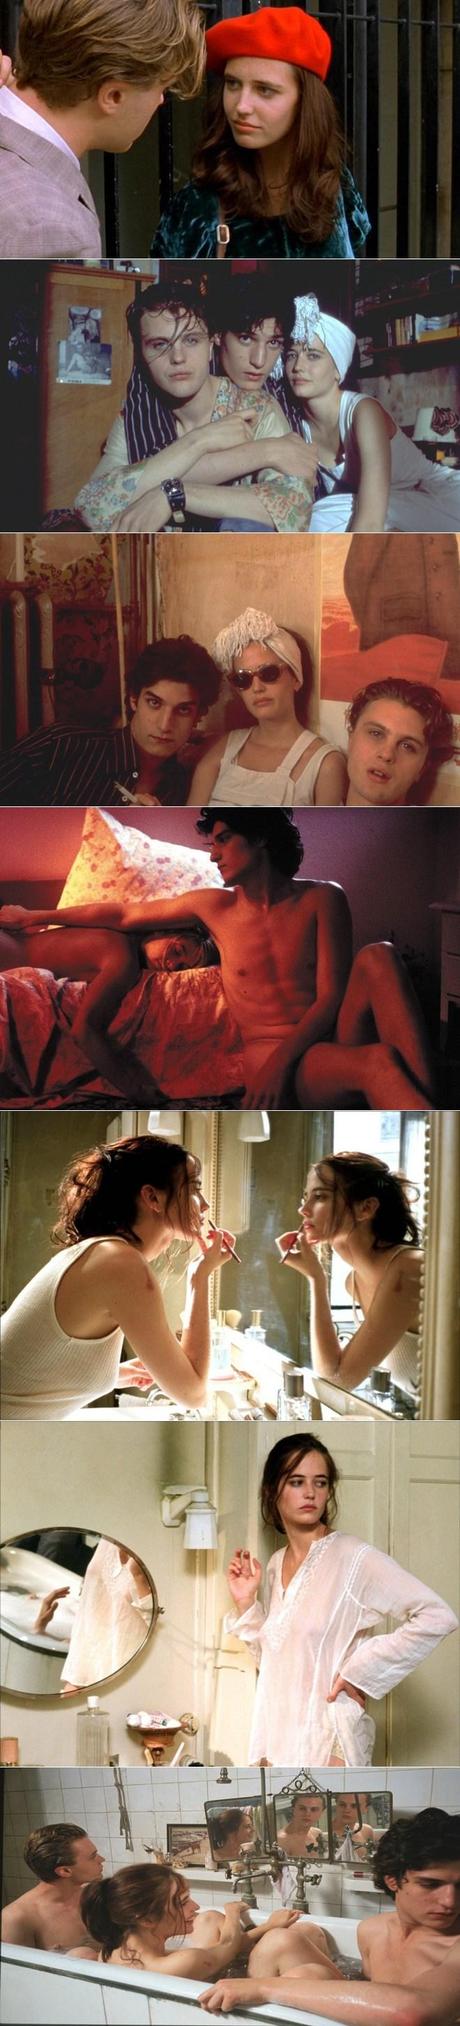 The dreamers